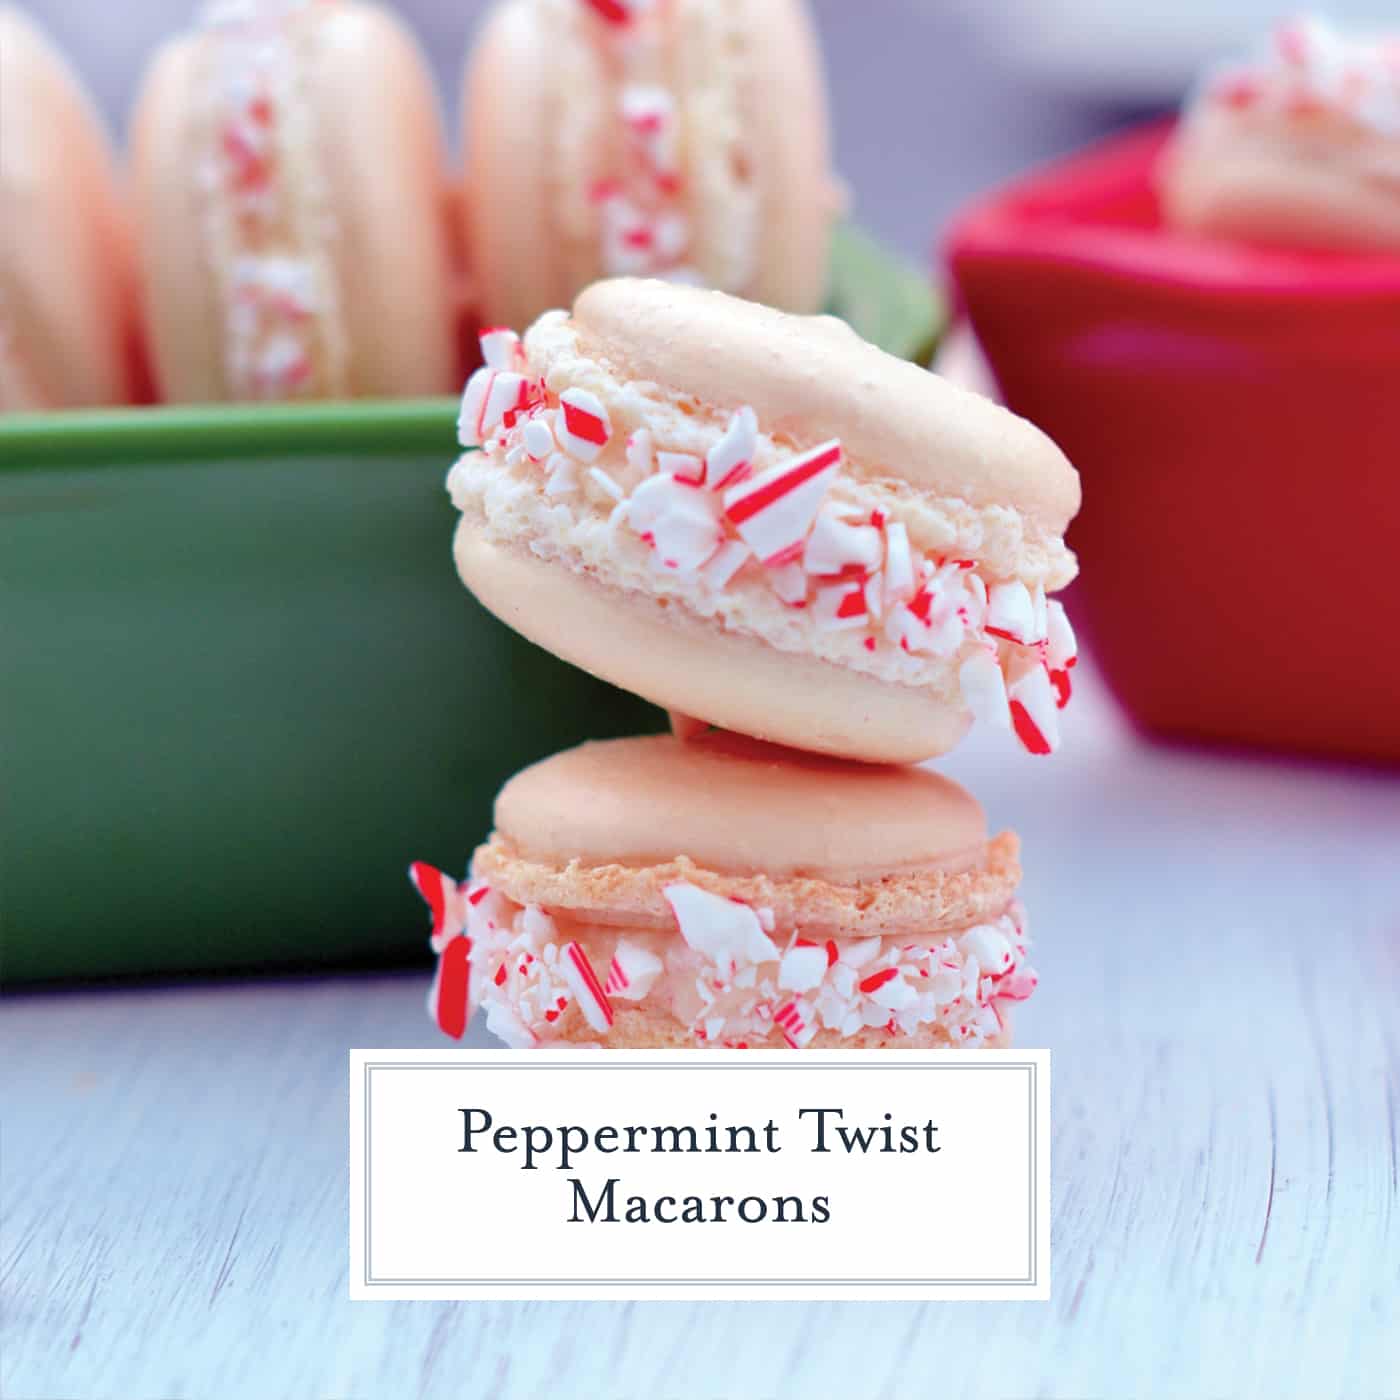 Peppermint Twist Macarons A Quick And Easy Macaron Recipe,Full Grown Wallaby Pet